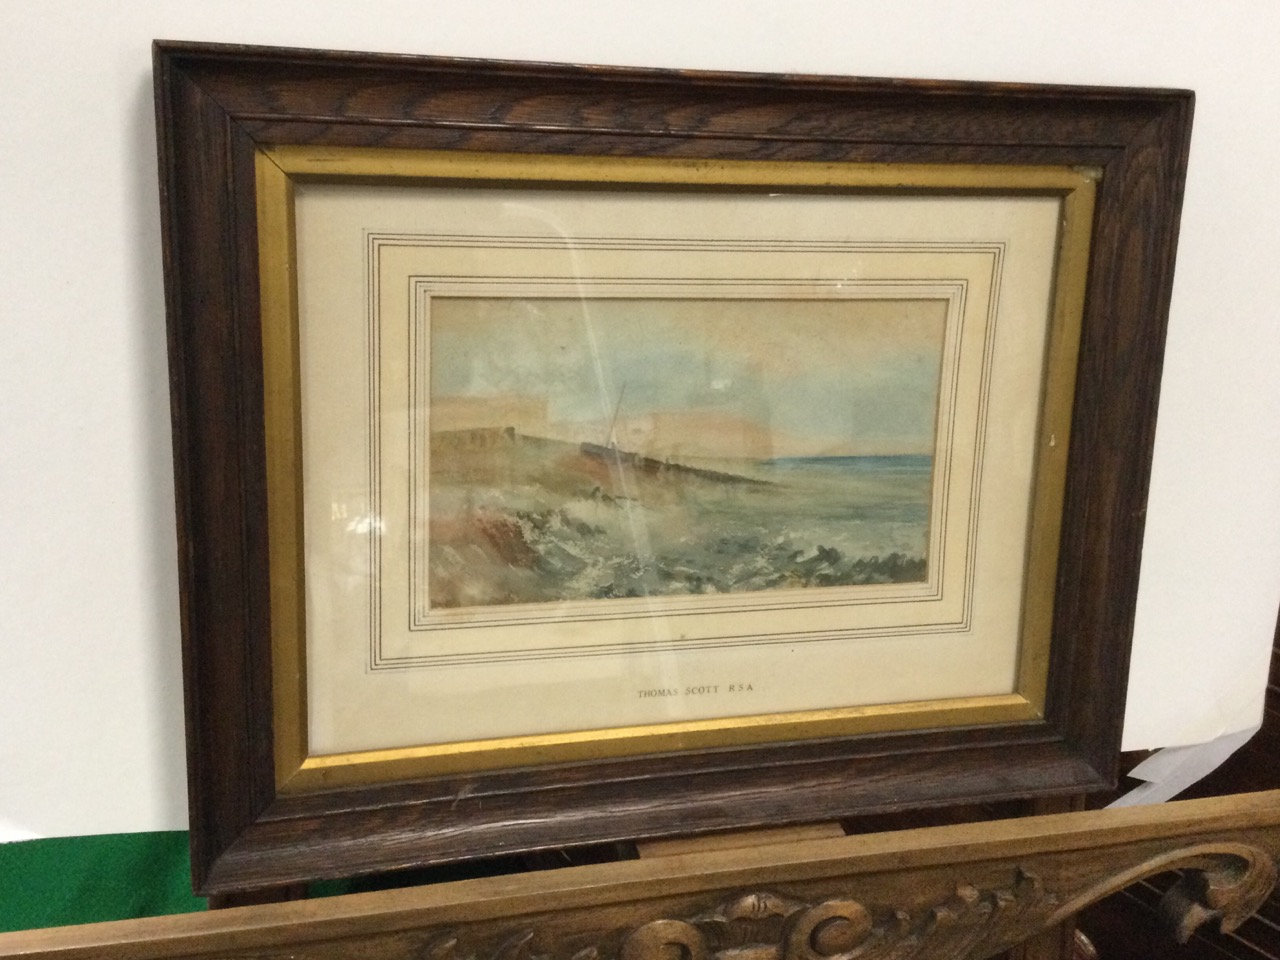 Tom Scott, watercolour, coastal seascape with boat & figure, inscribed in pencil to verso, mounted &